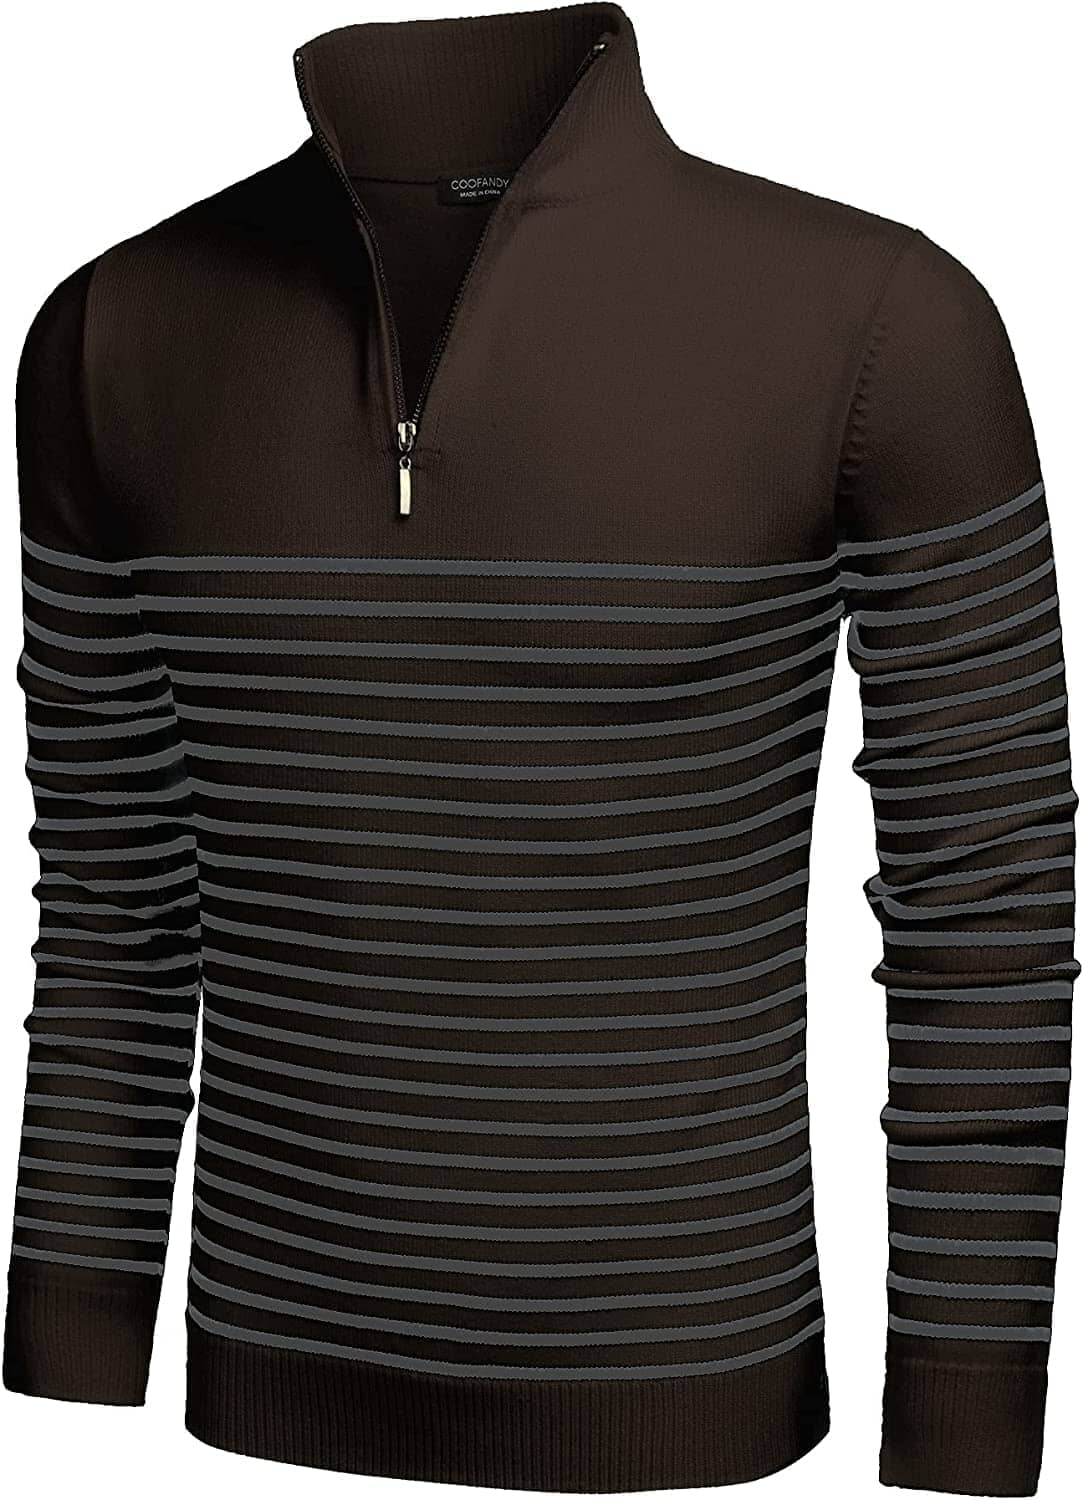 Striped Zip Up Mock Neck Pullover Sweaters (US Only) Sweaters COOFANDY Store Brown S 